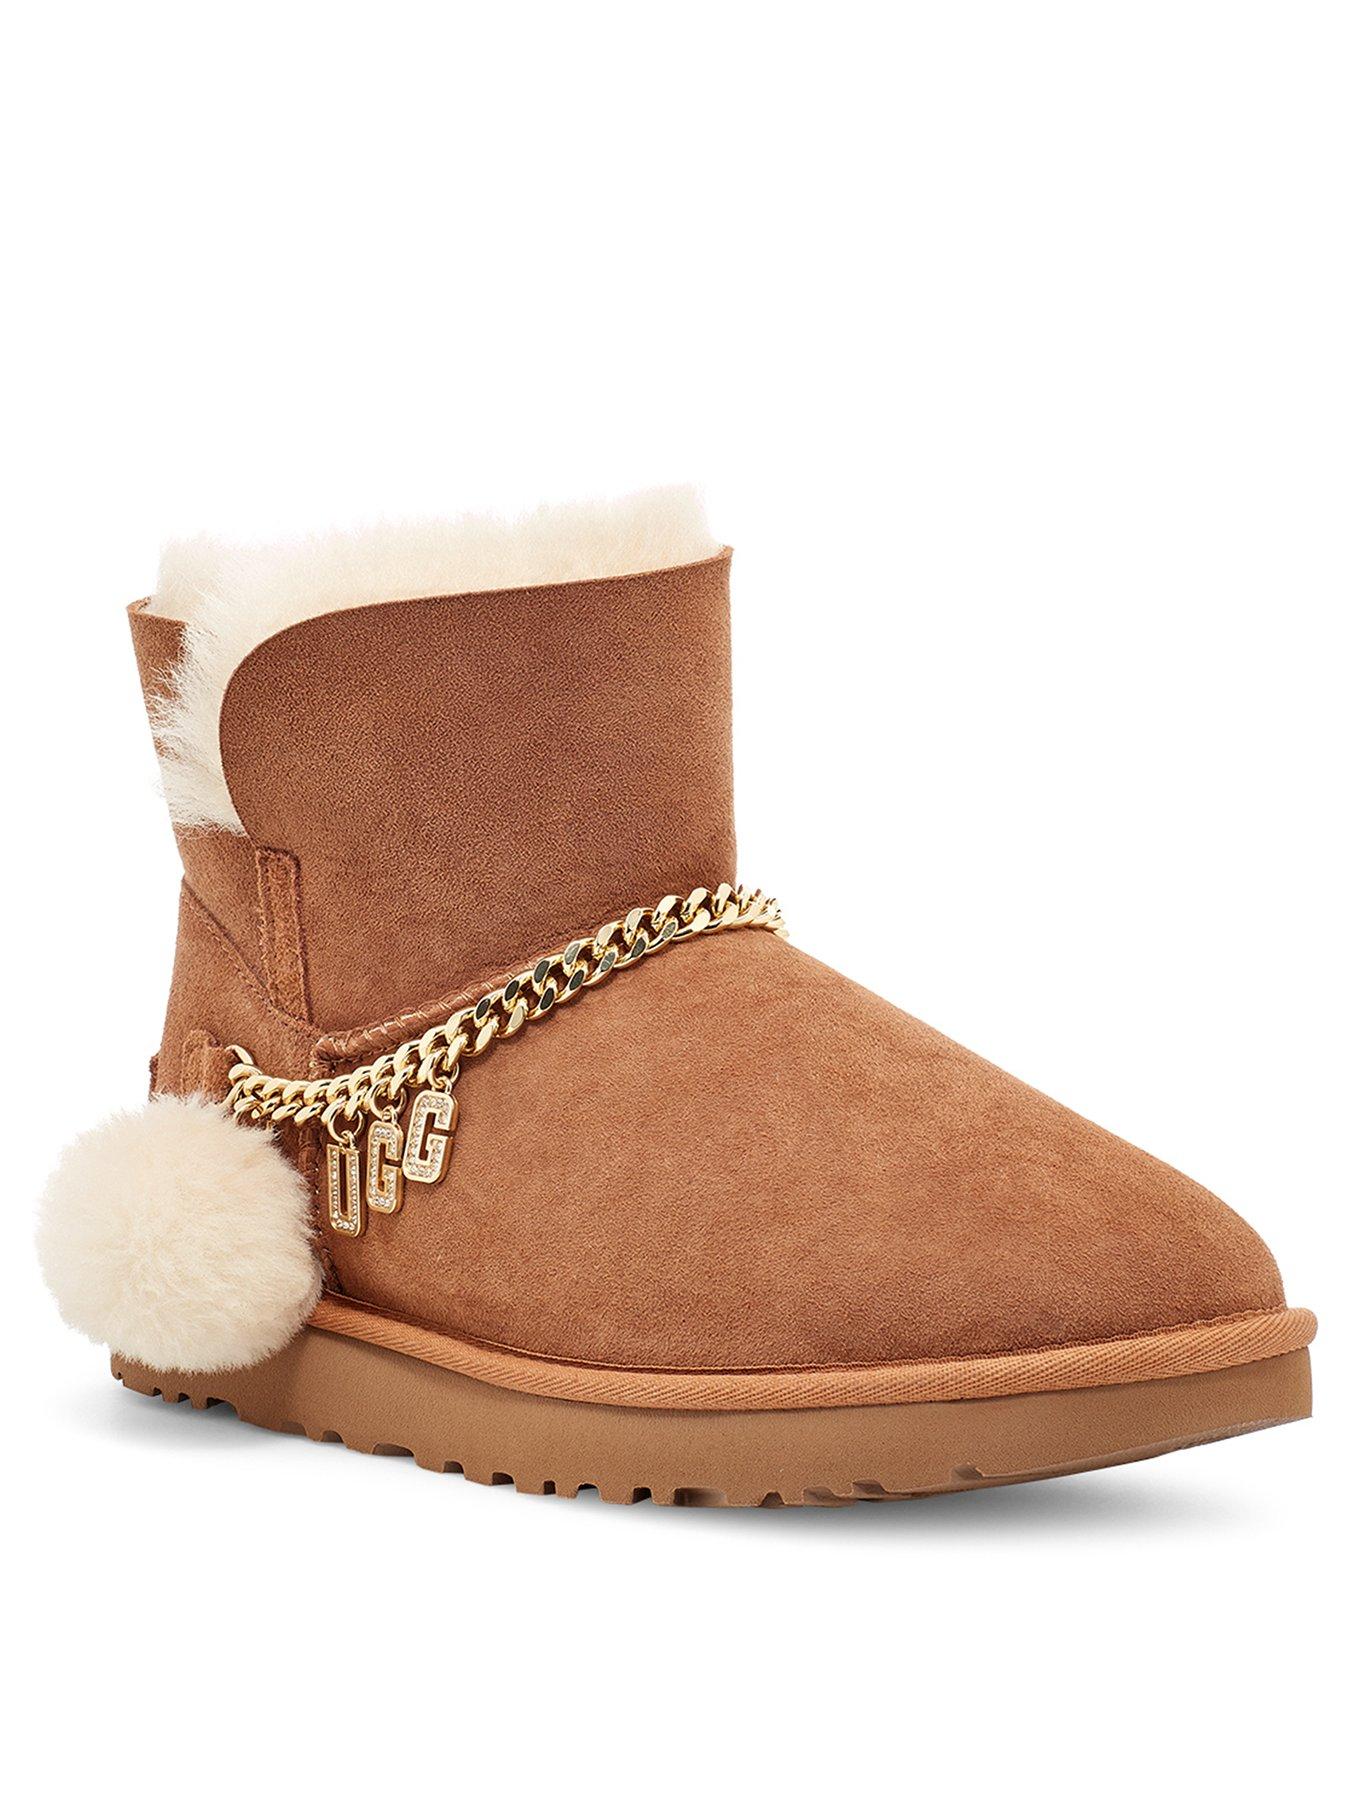 cheap ugg boots clearance sale uk